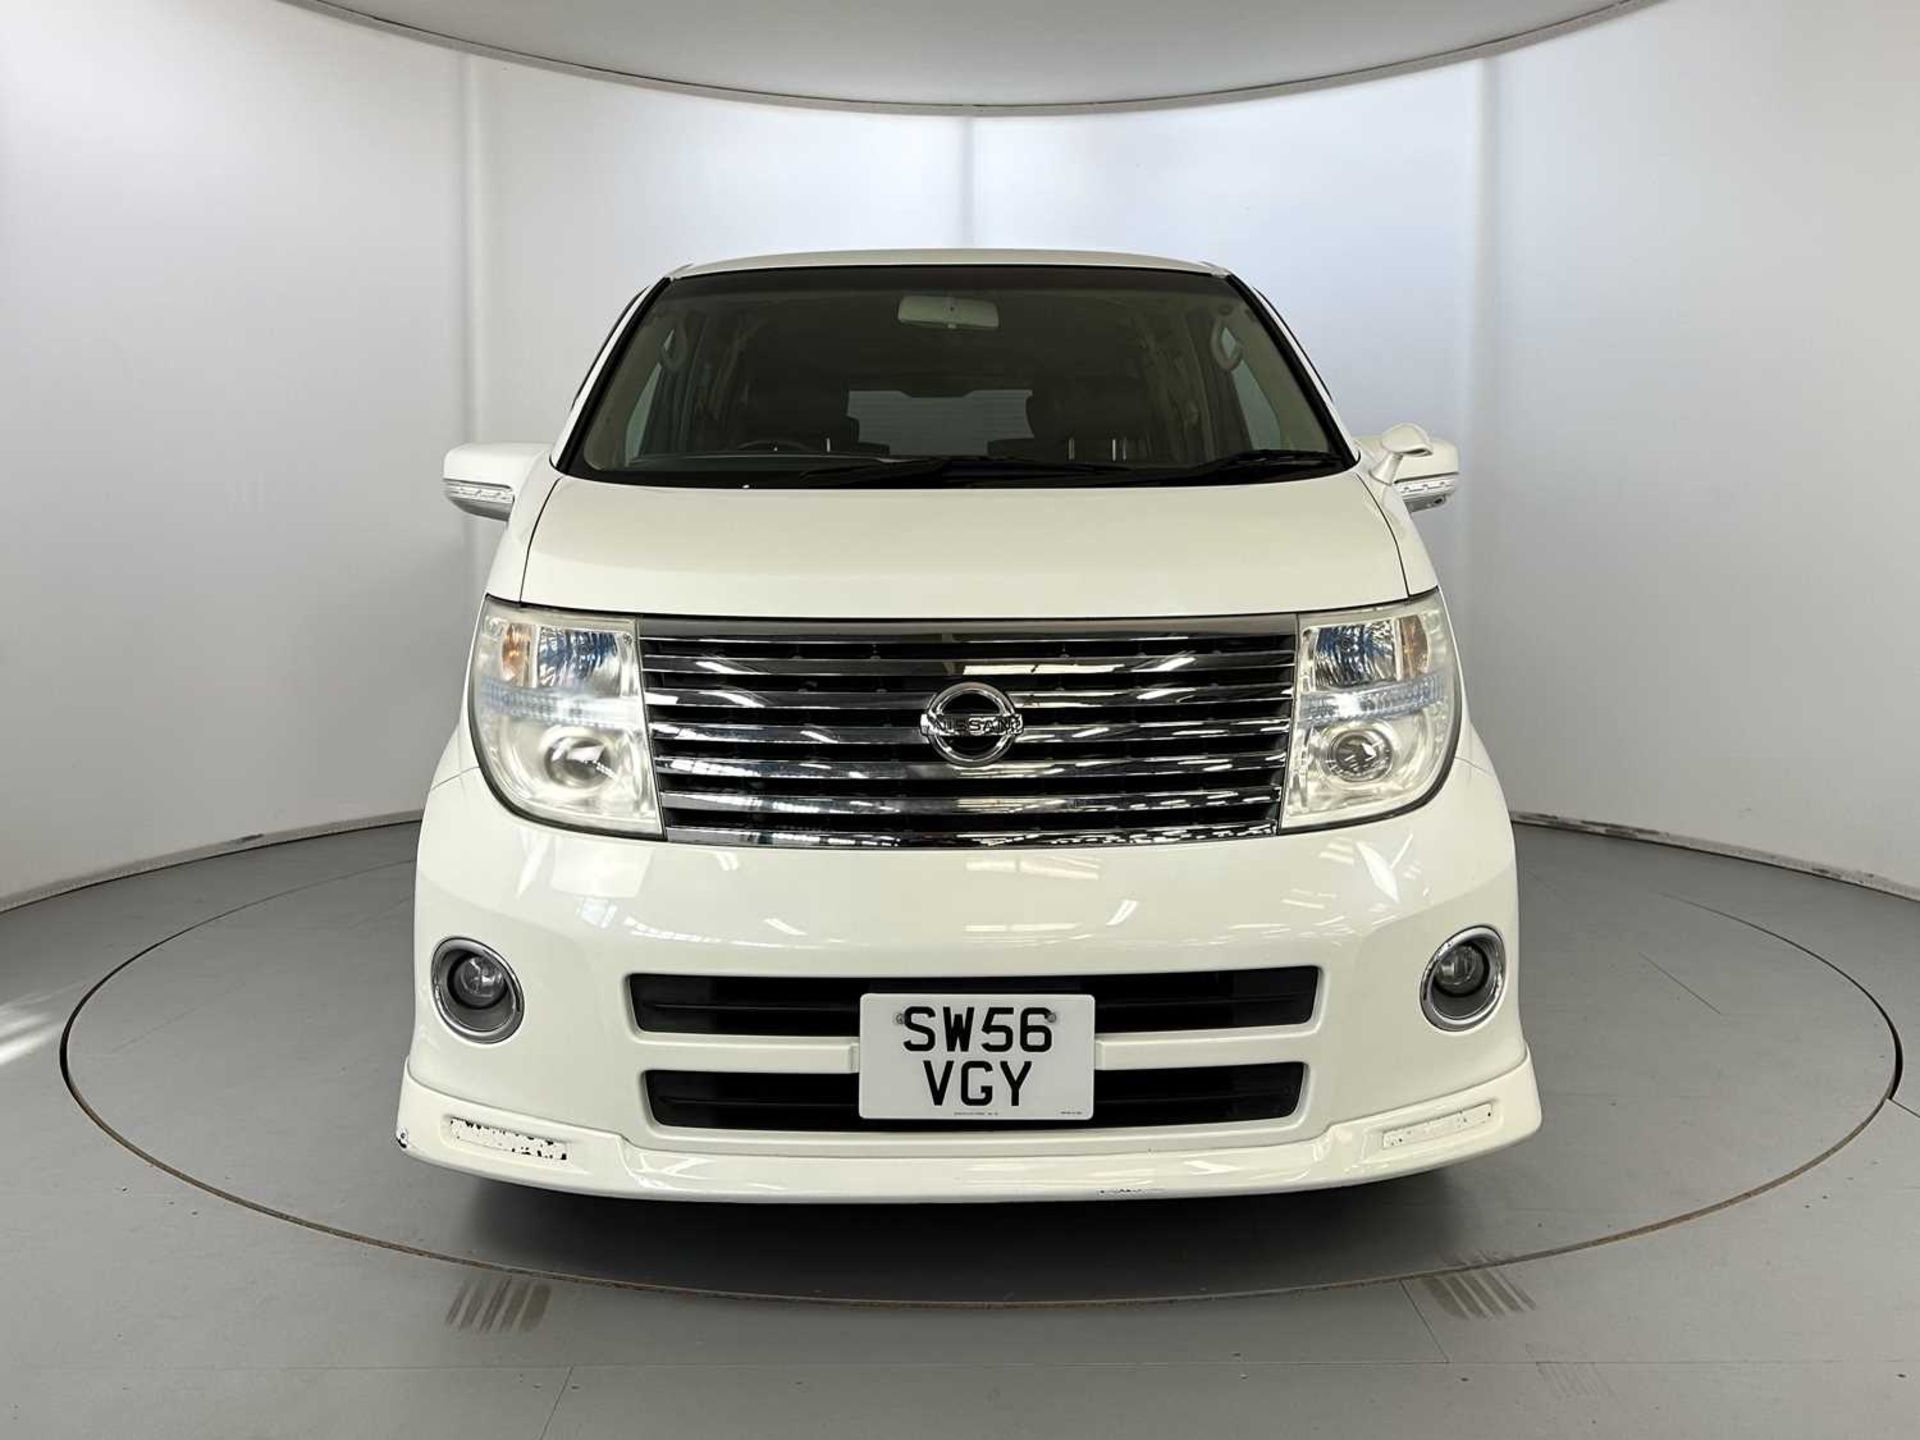 2007 Nissan Elgrand - Highway Star Edition 4WD - Image 2 of 39